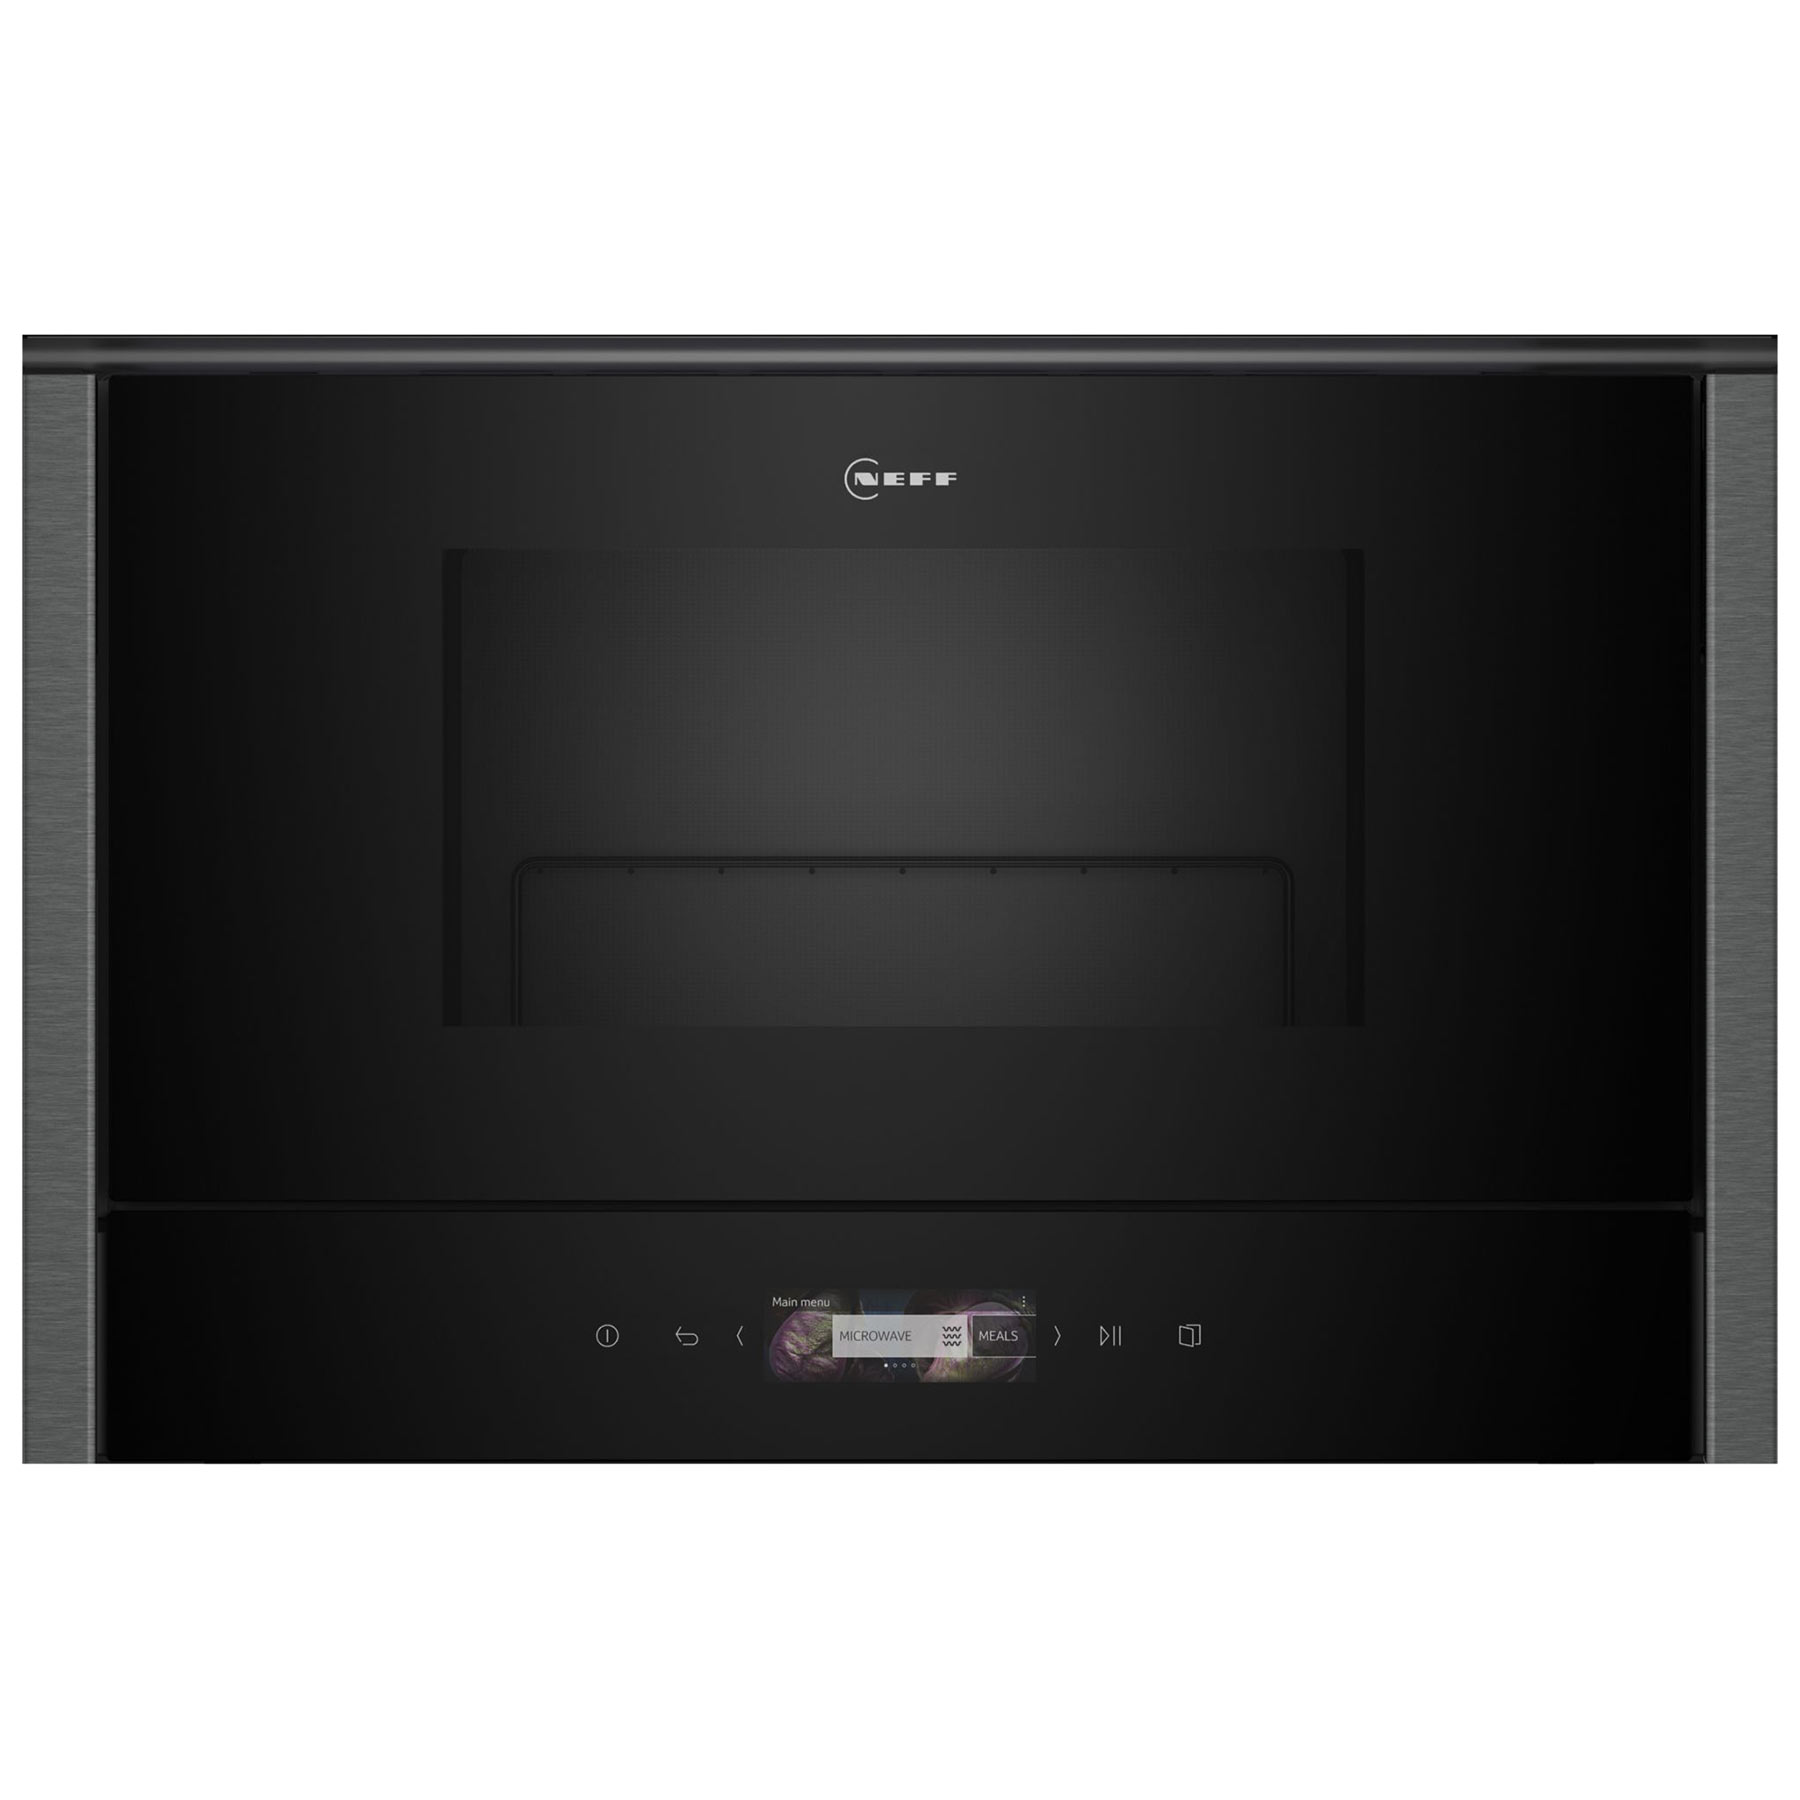 Neff NR4GR31G1B N70 Built In Microwave Oven Black 900W Right Hinged